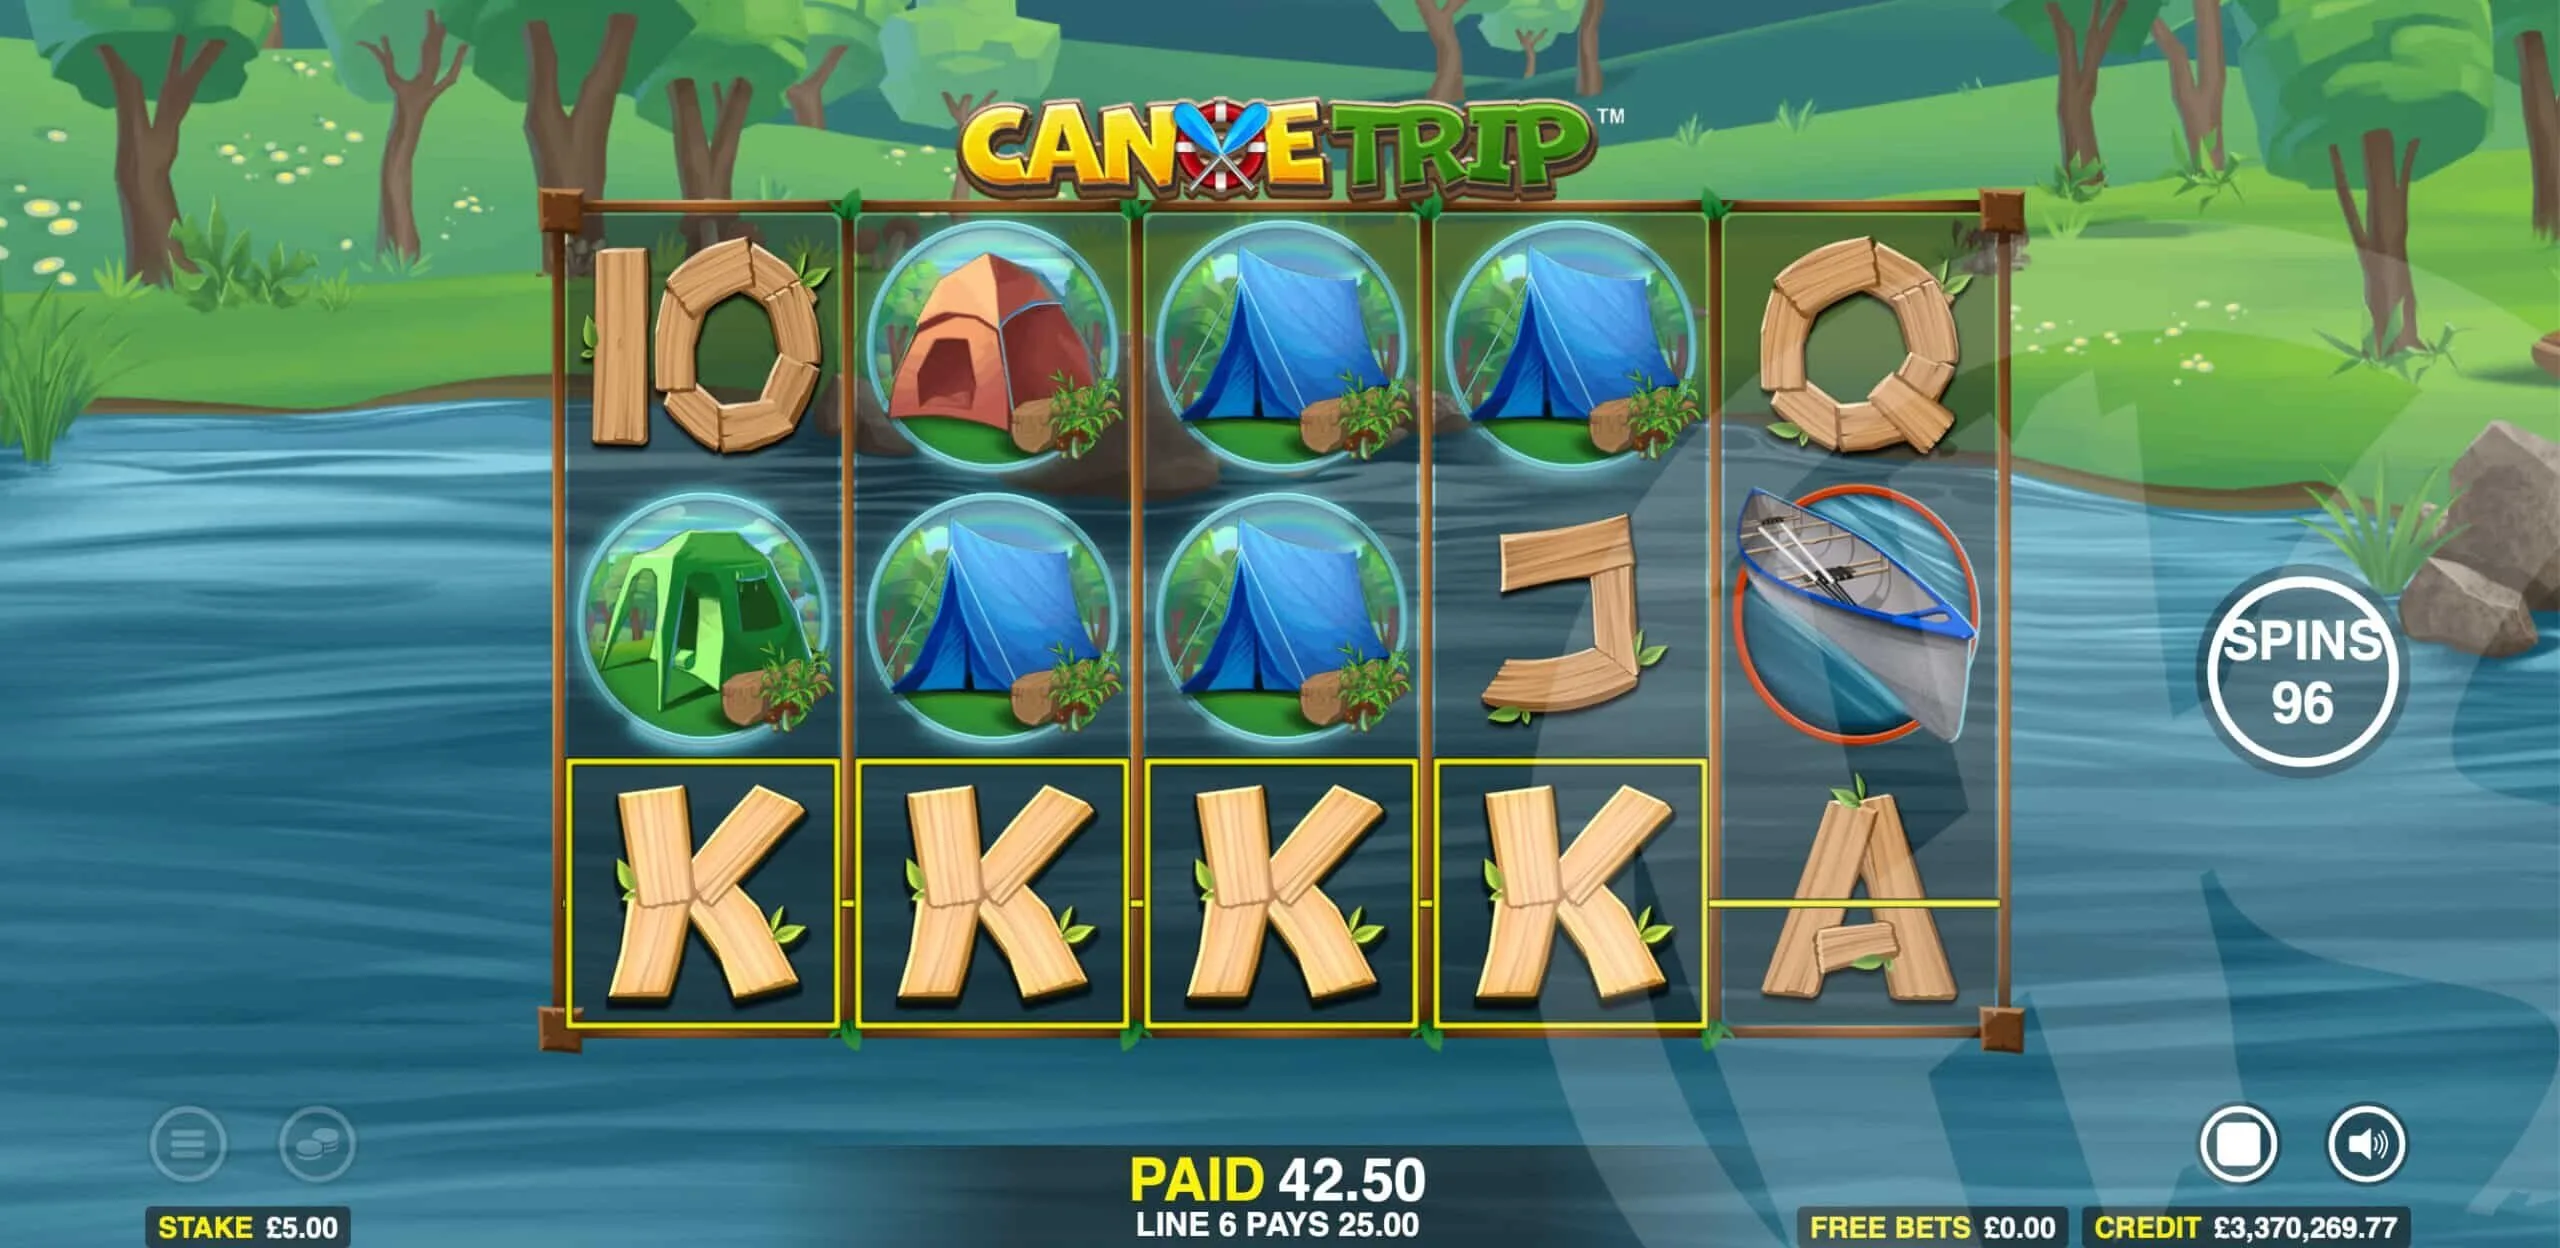 Canoe Trip Offers Players 10 Fixed Win Lines